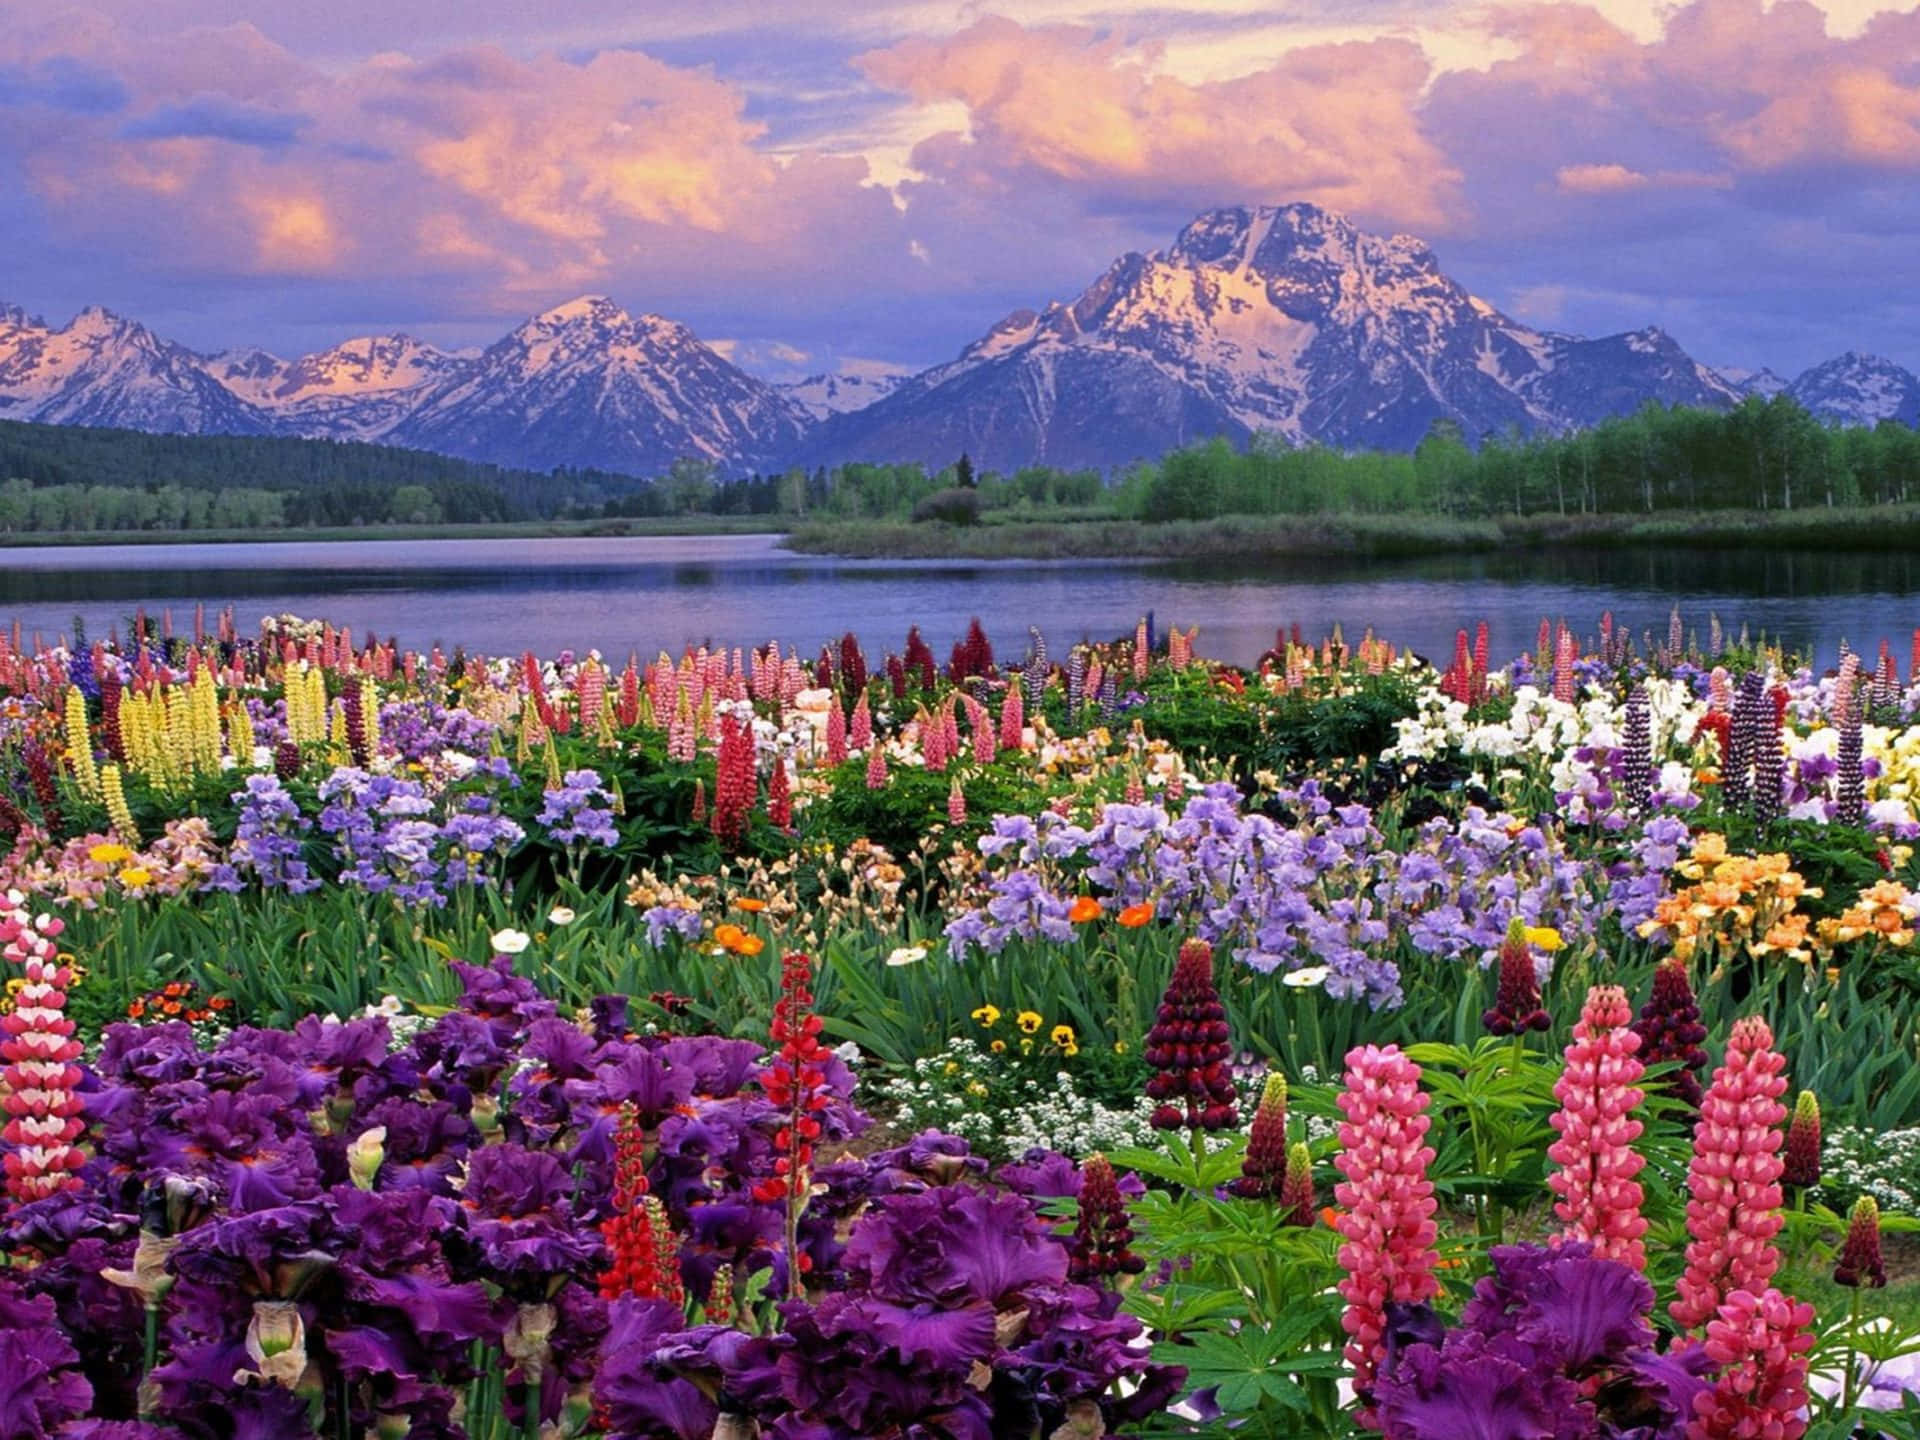 A Colorful Flower Field With Mountains In The Background